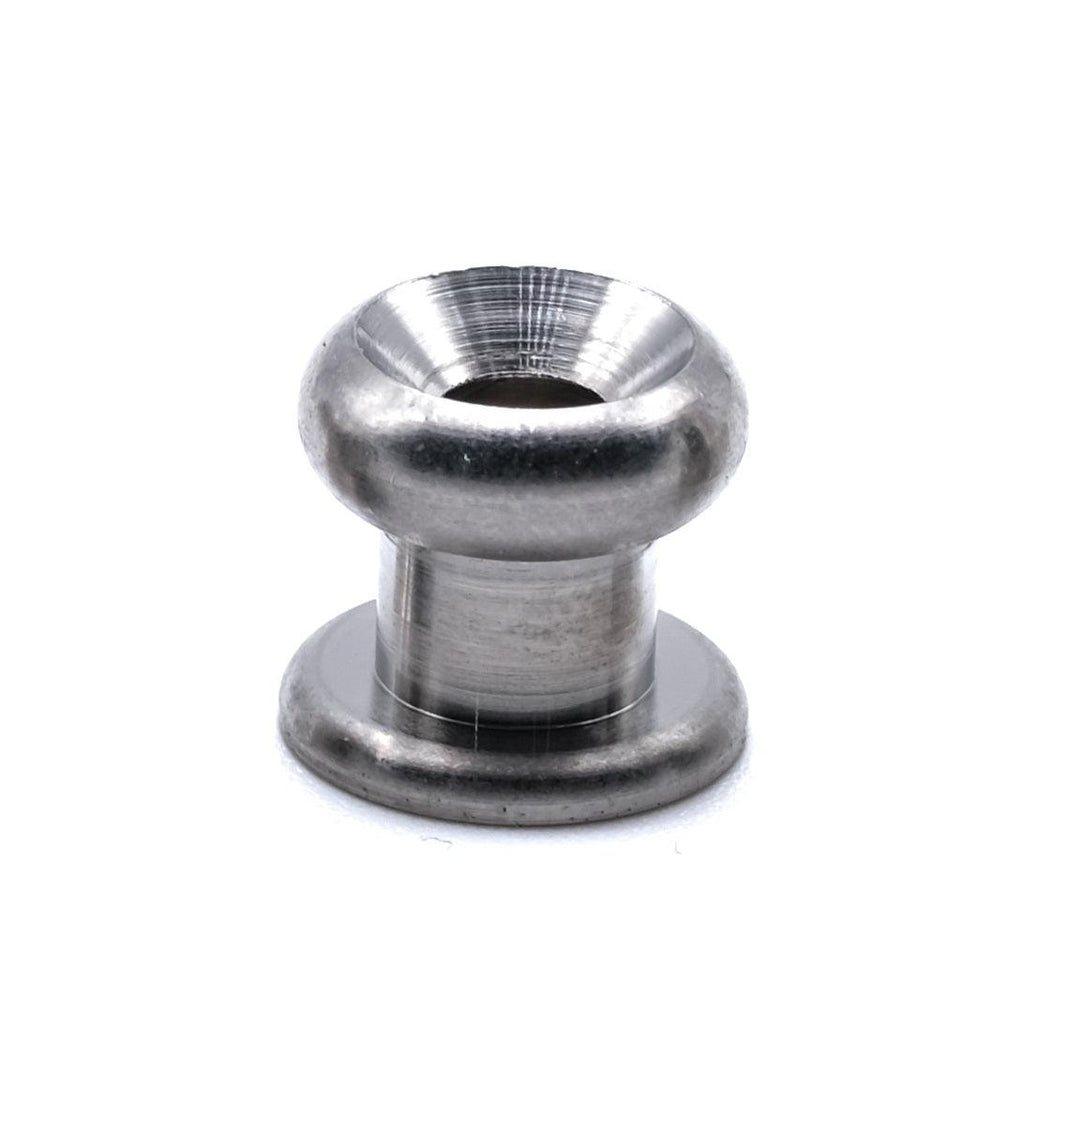 Stainless steel lacing button slimline Type C 316 A4 marine grade - 4Boats